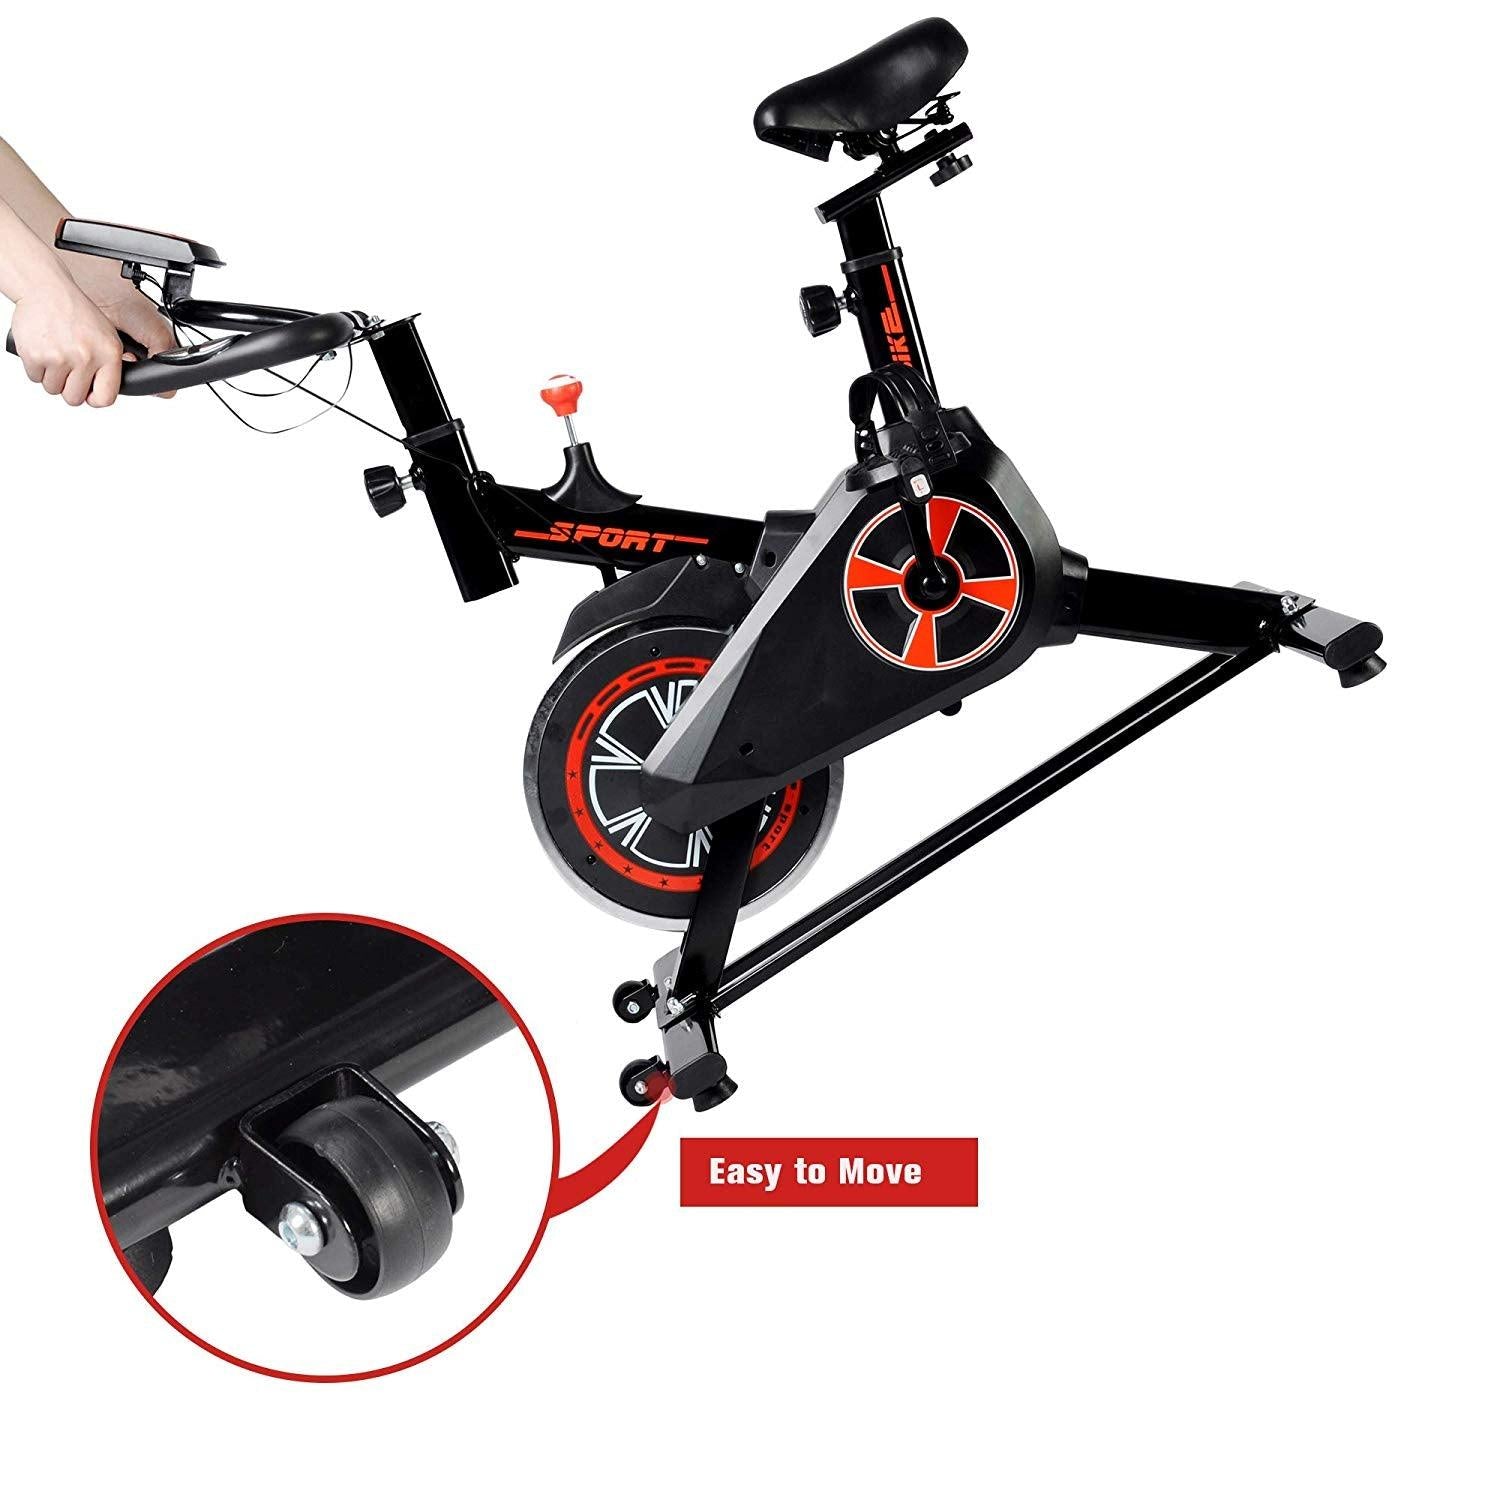 Bosonshop Indoor Cycling Bike, Stationary Bicycle with LED Display for Home Gym